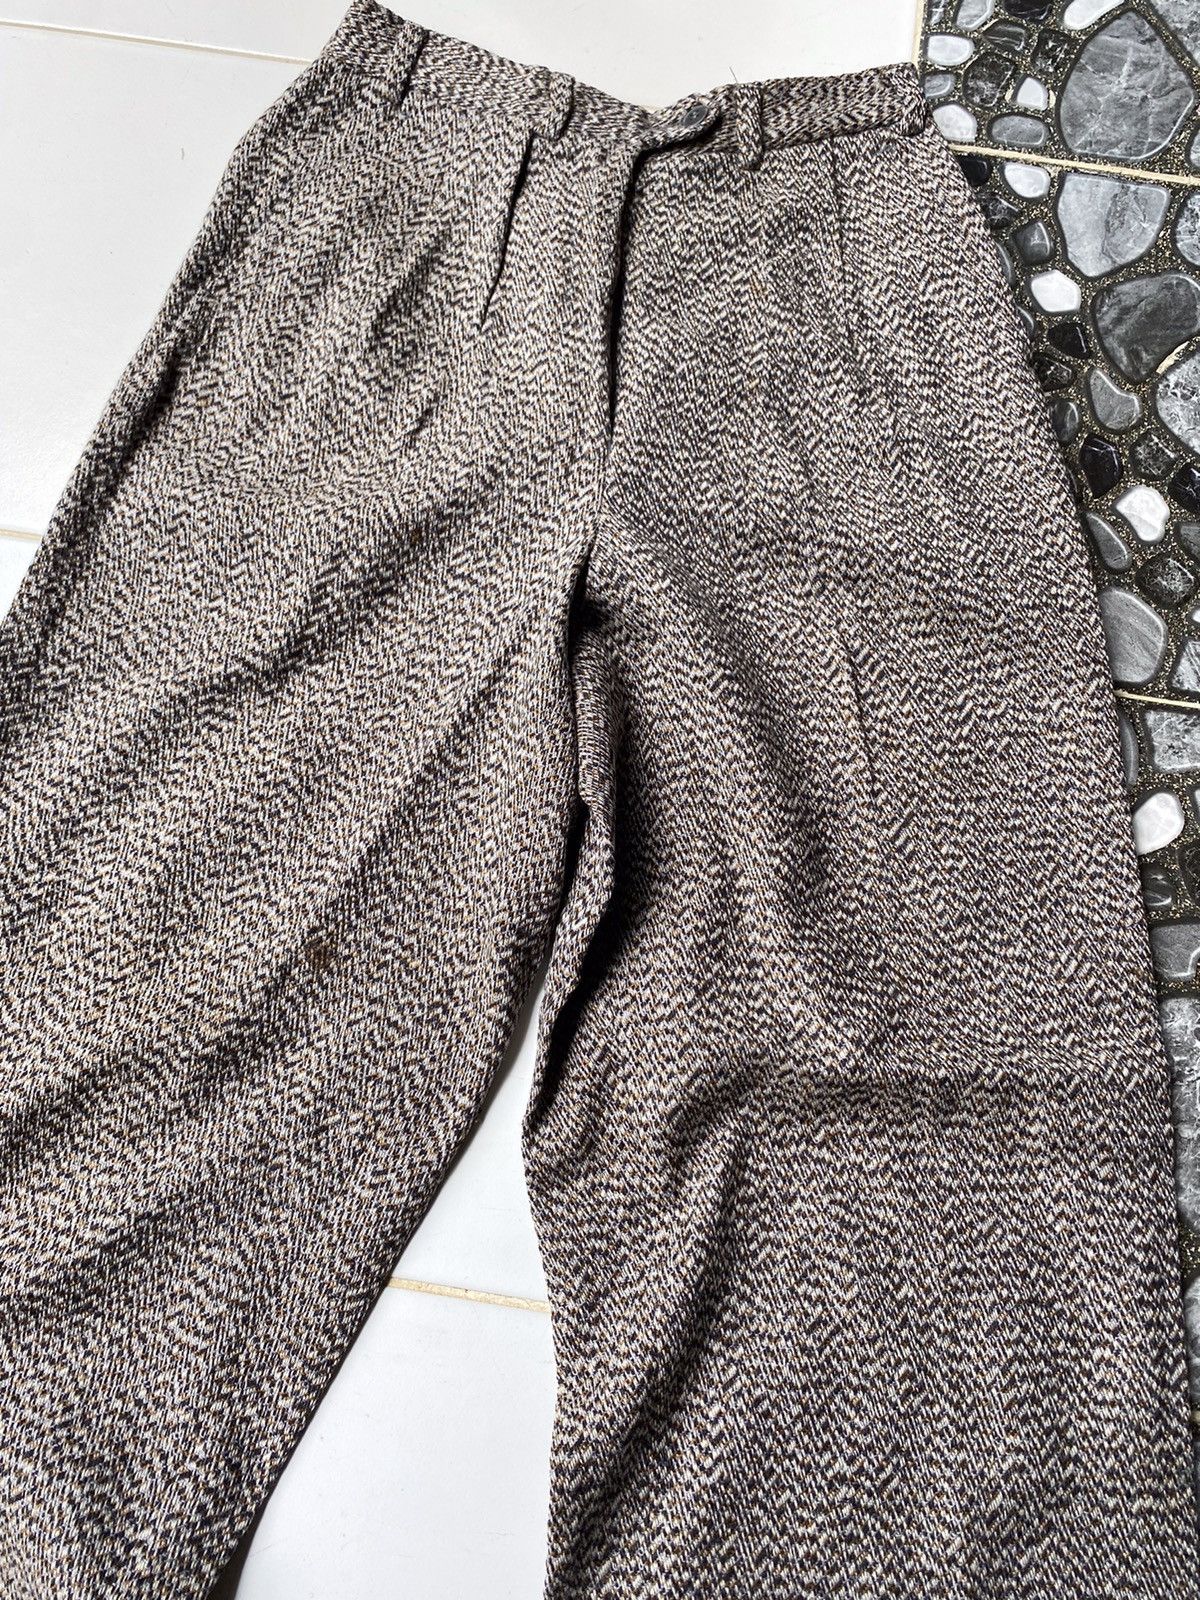 Vintage Giorgio Armani Wool Pants Made In Italy -R6 - 7